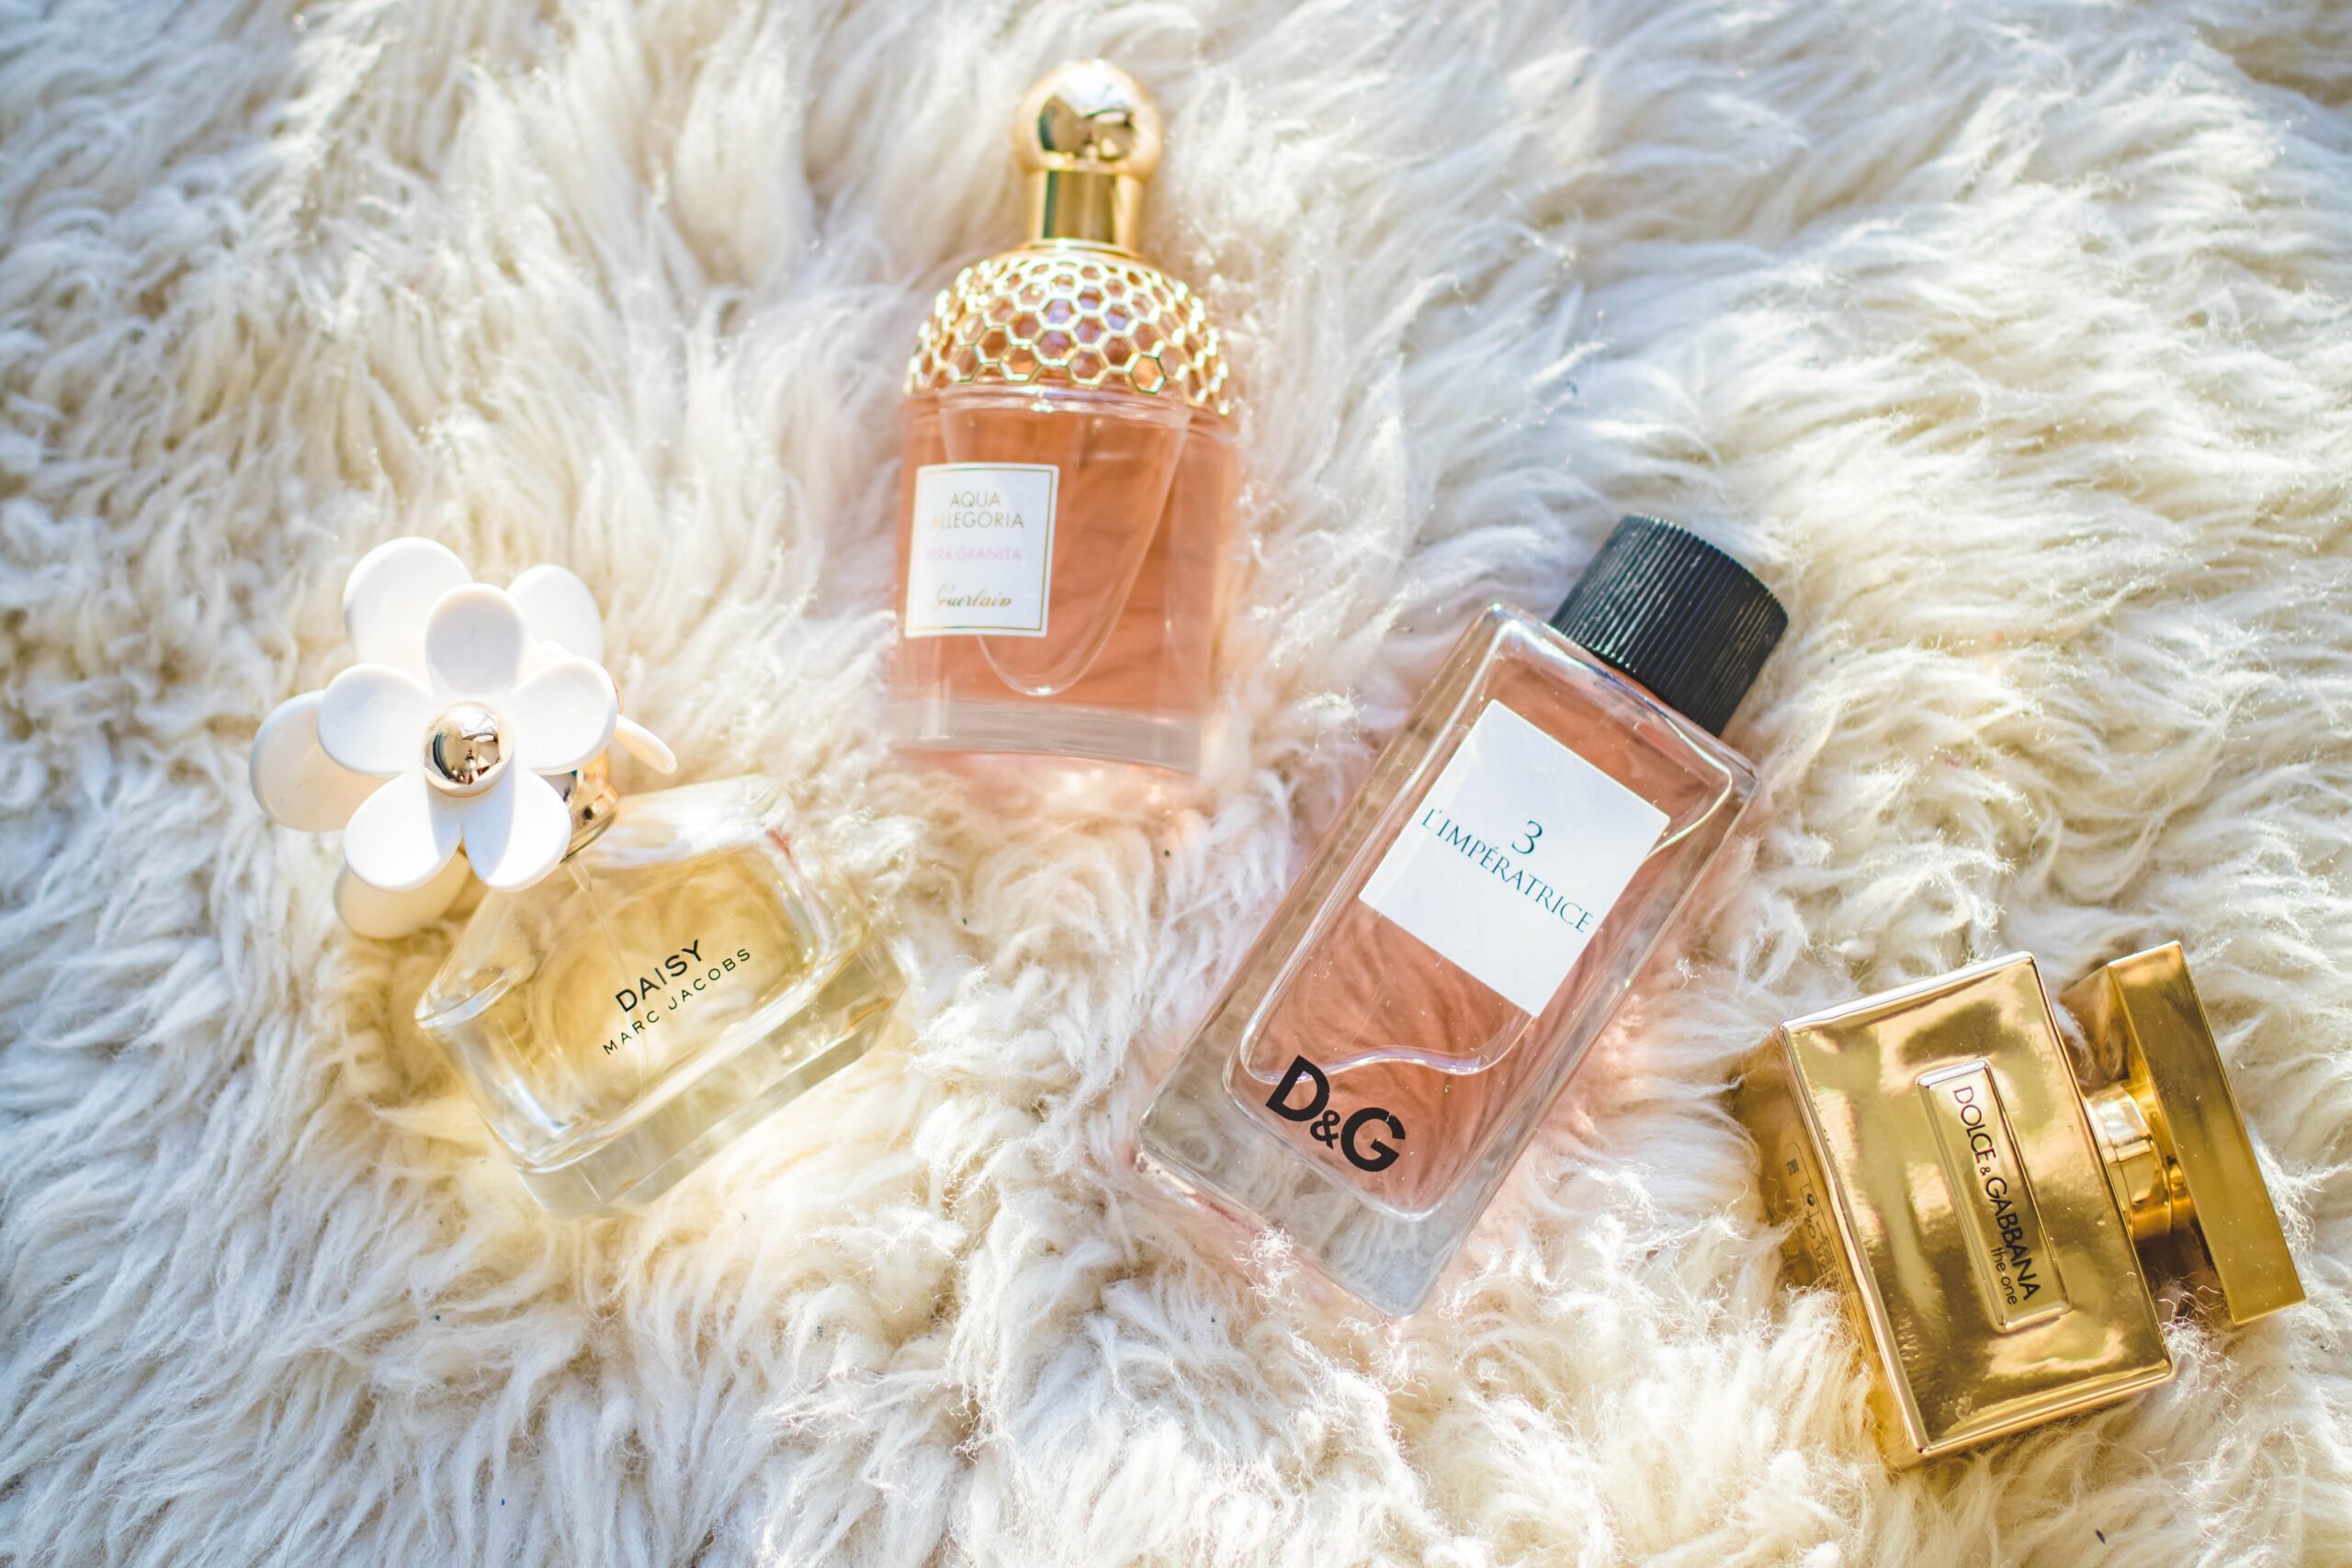 A variety of luxury perfumes are laid on a fuzzy, white garment.